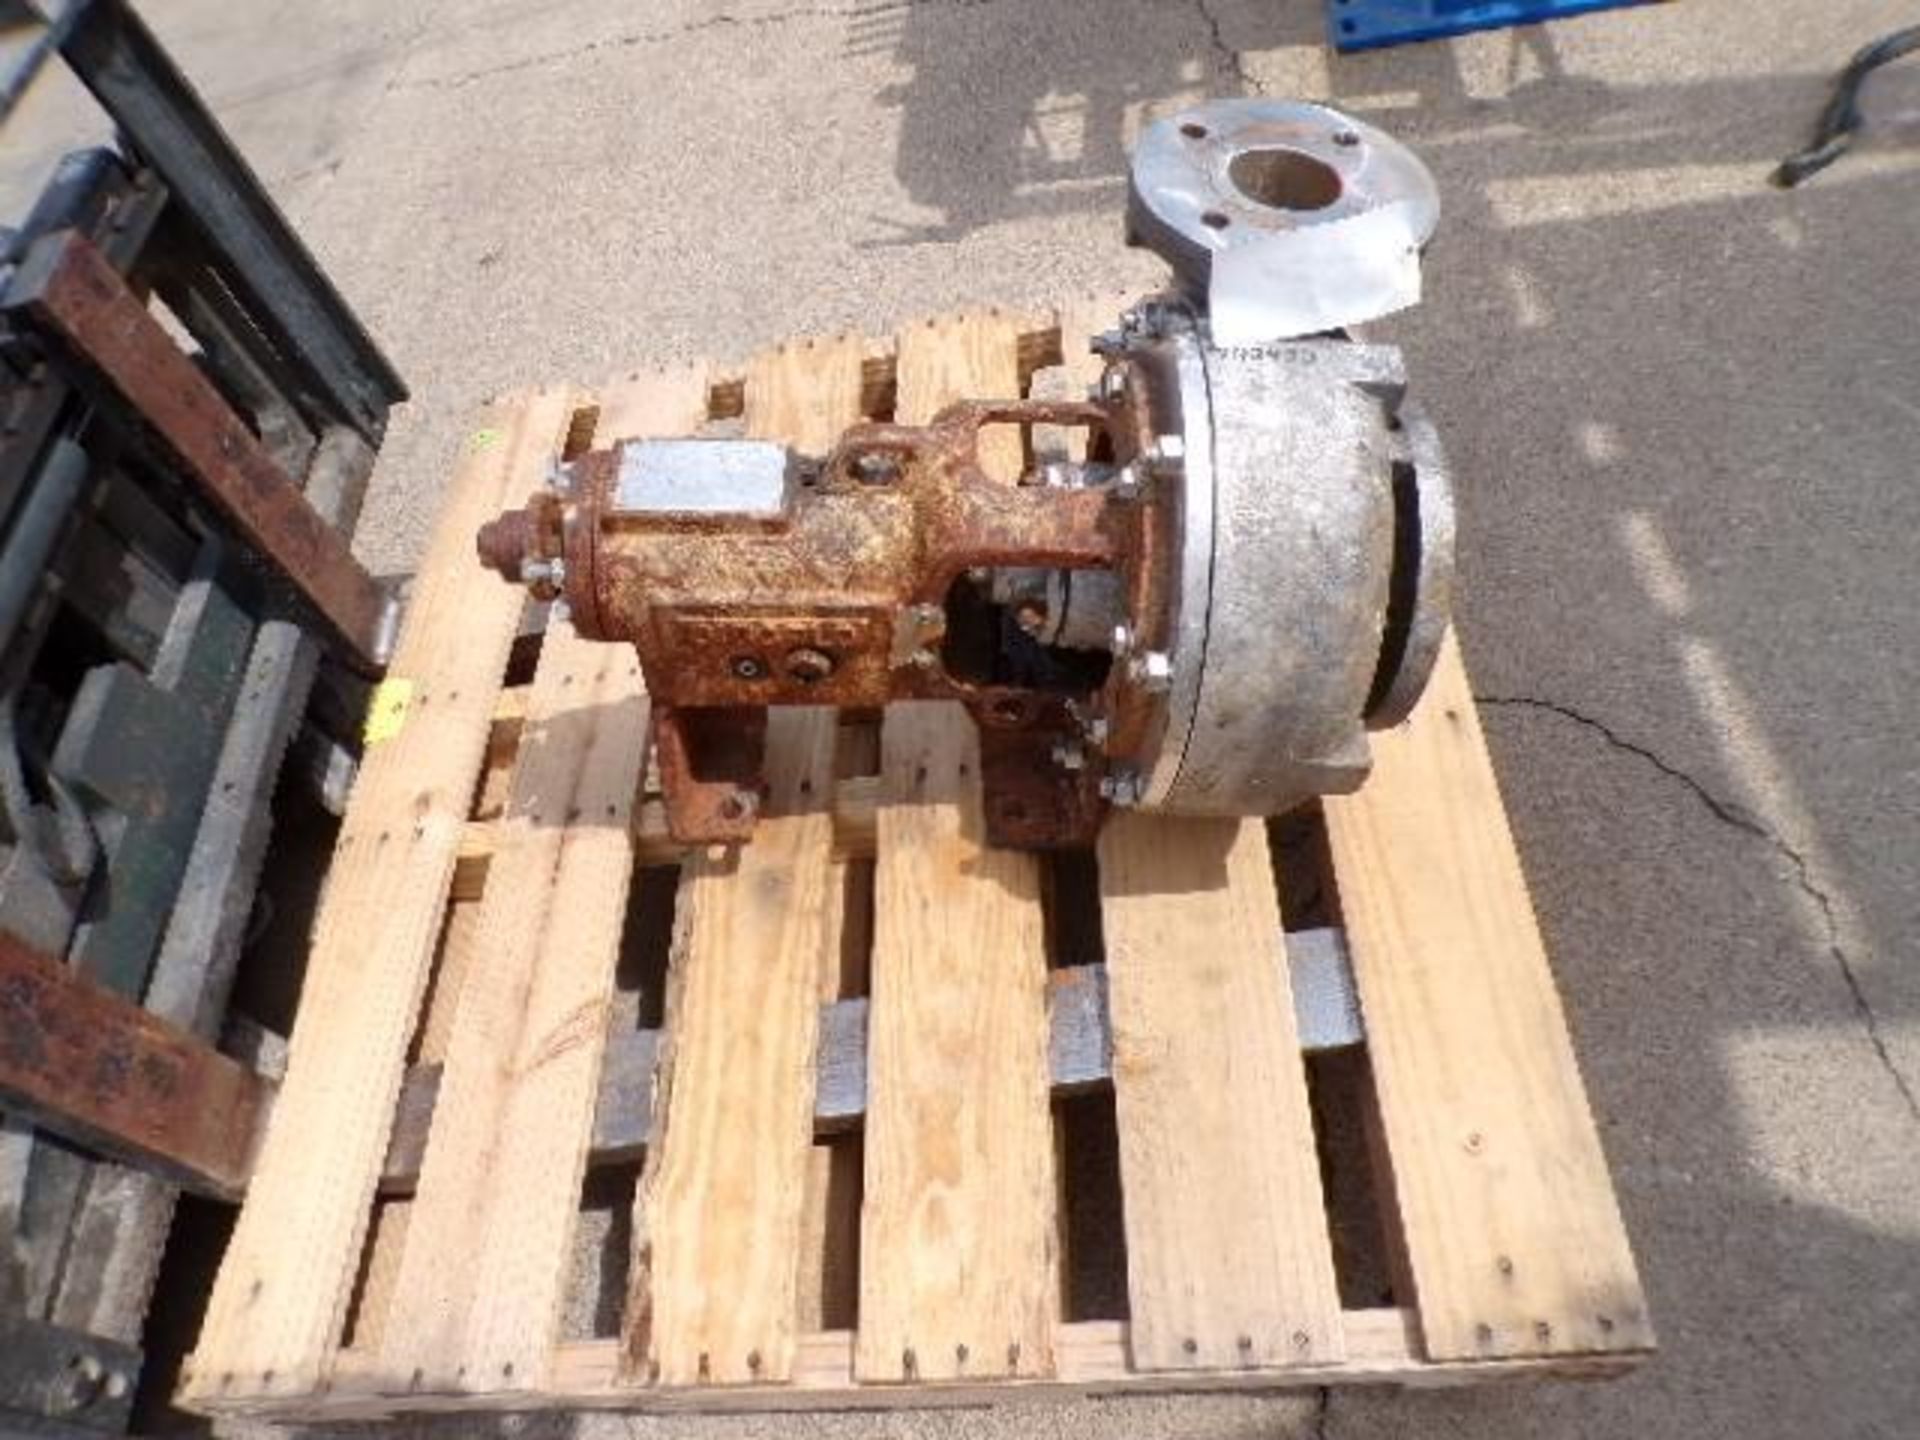 Pallet w/ (1) Discflo Pump, Model 403-12, 100 GPM, S/N 8455, 4" to 3" Ports (Used) - Image 3 of 4